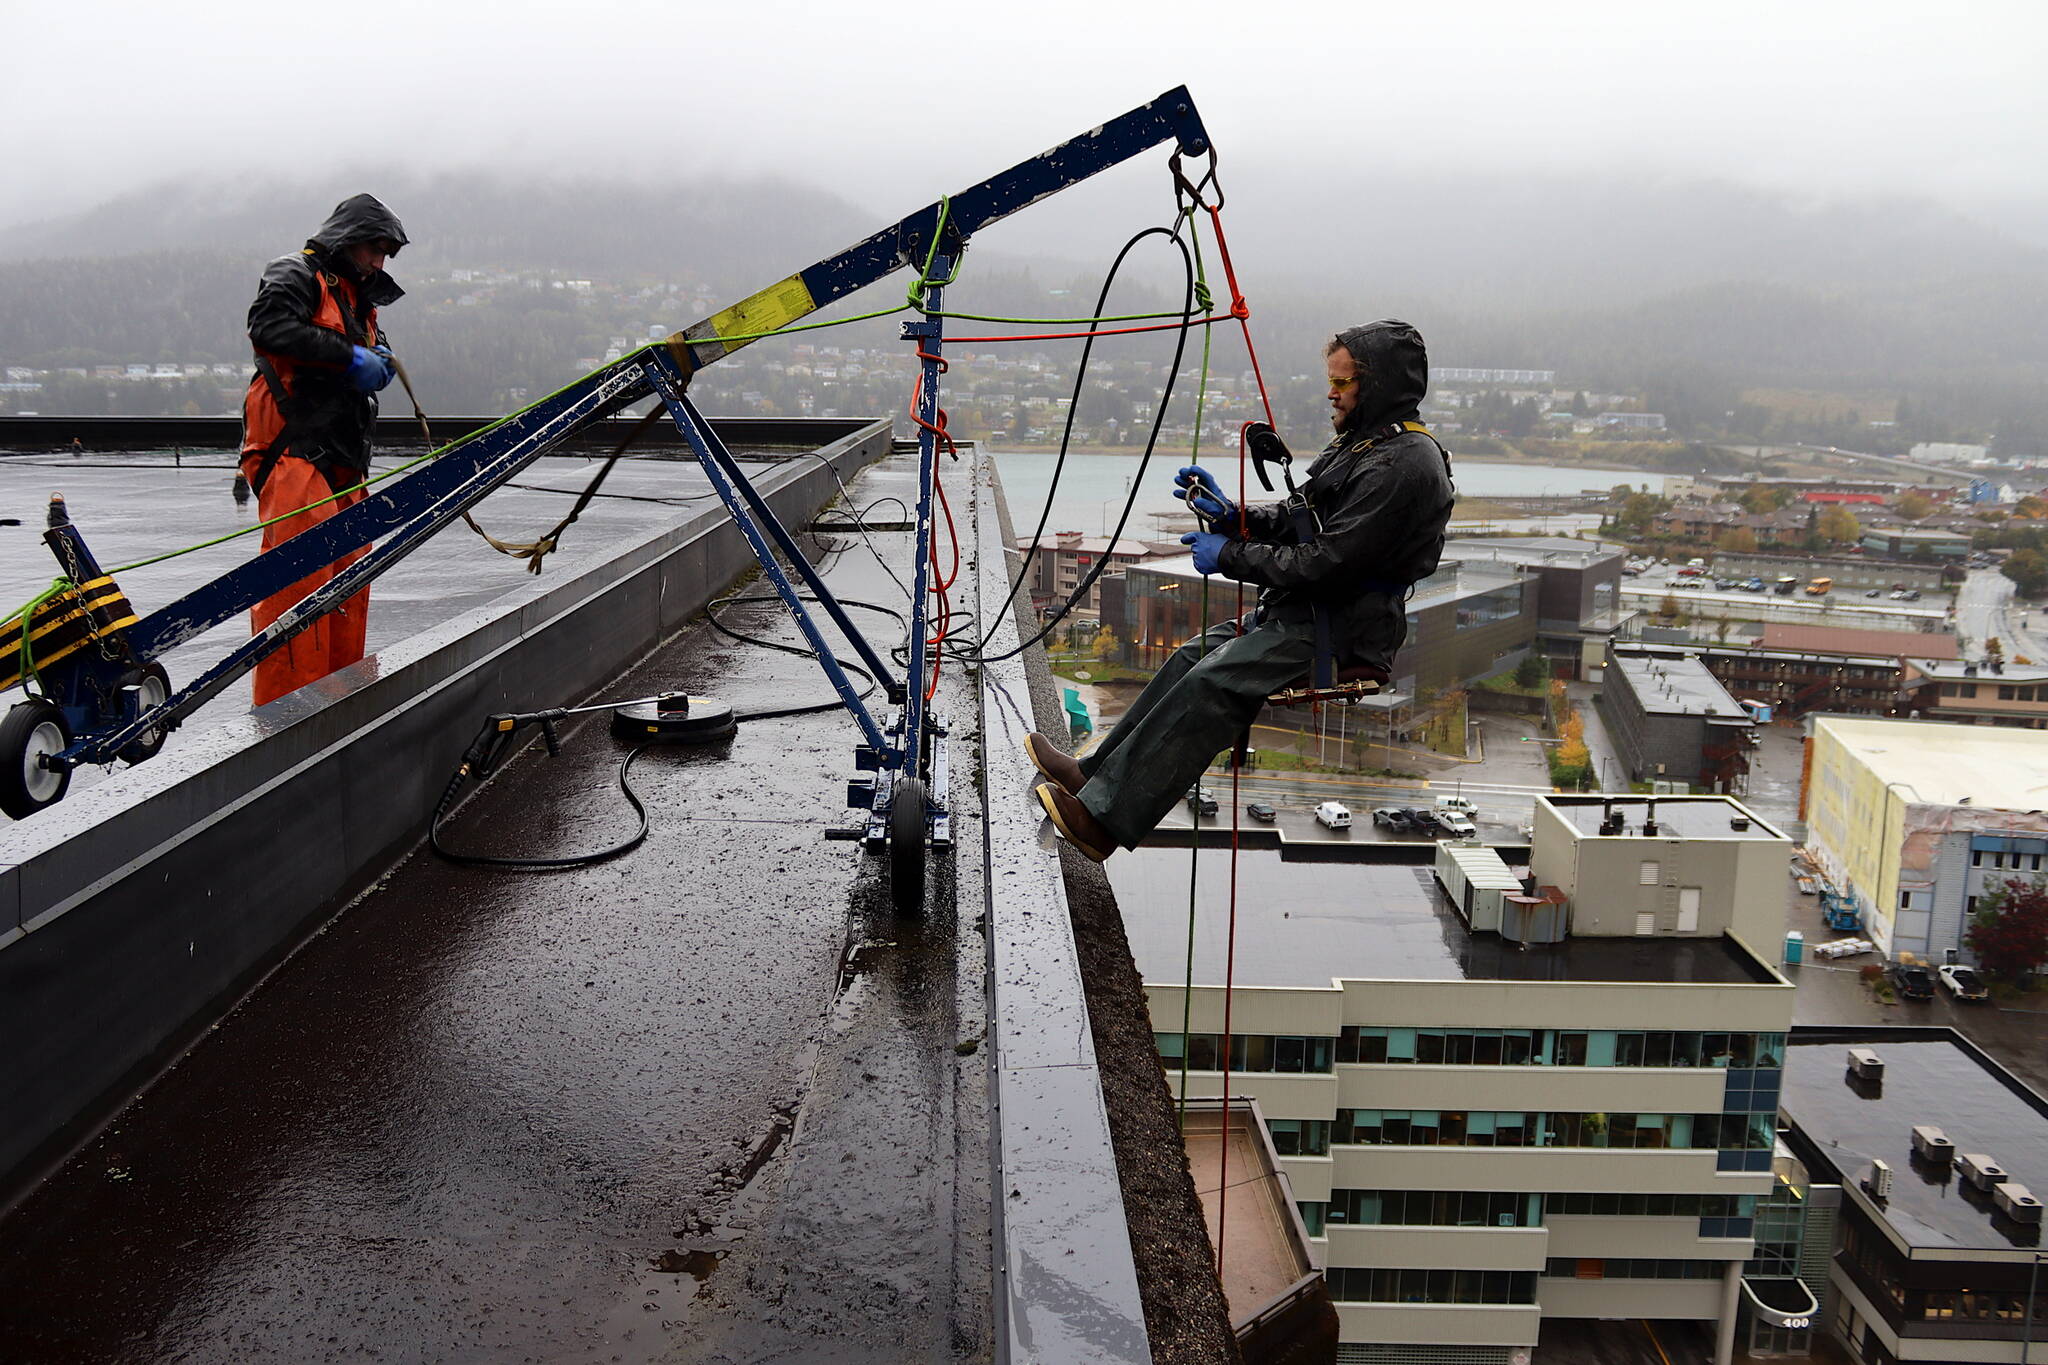 Brick Engstrom (right) connects his harness to a rope on a crane-like device Thursday morning that allows him, co-worker Colton Baucom and two other people to rappel down the 11-story State Office Building as they clean it with pressure washers. The first such cleaning in at least a decade, which began a week ago, is expected to take about another month. (Mark Sabbatini / Juneau Empire)